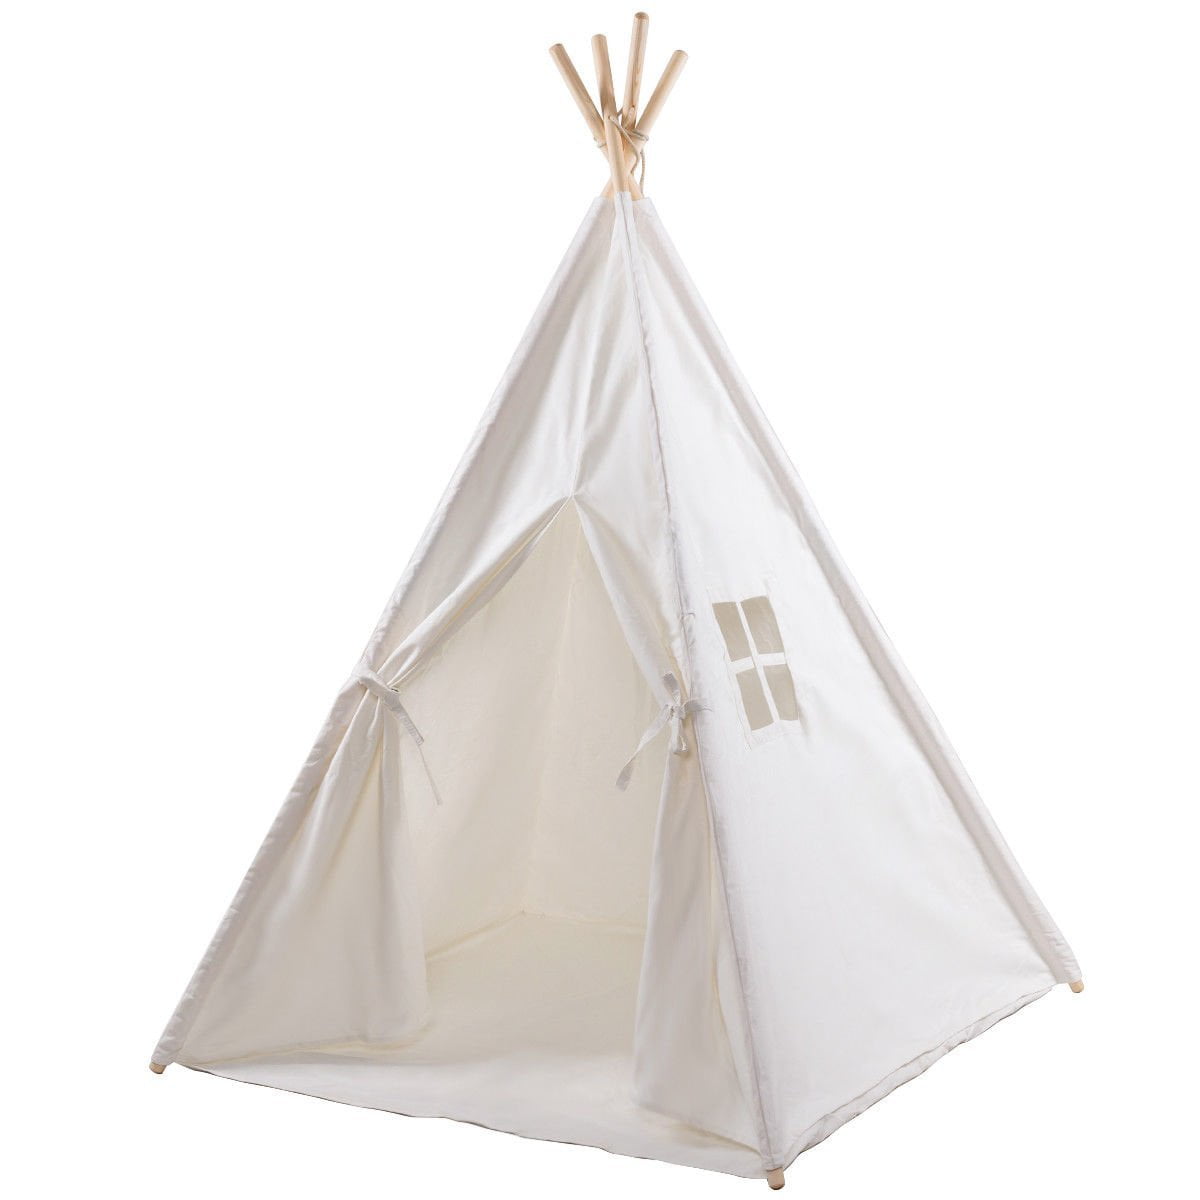 Details about   165cm High Portable Children Indian Tent Sleeping Teepee Baby Play House Canvas 